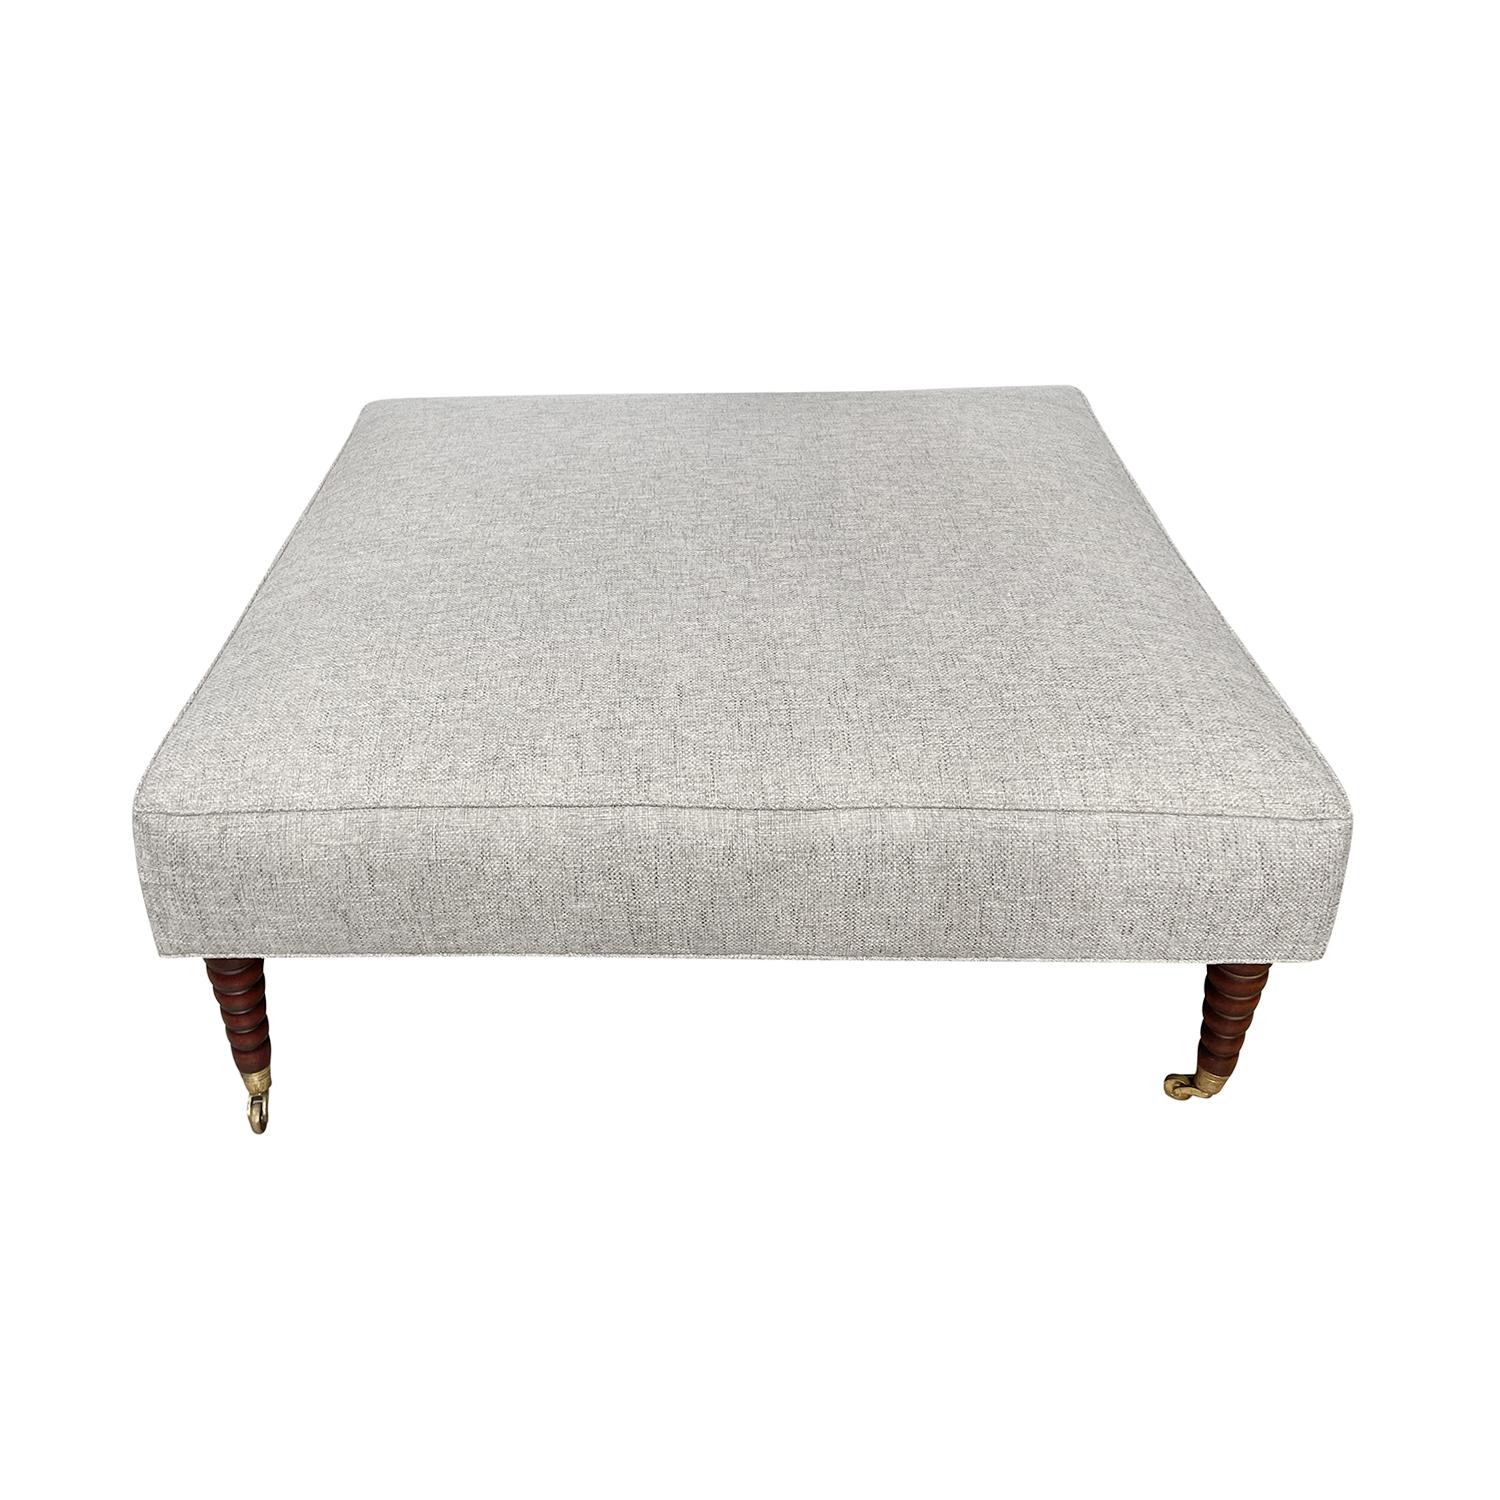 20th Century Grey Italian Vintage Walnut Ottoman, Large Square Sofa Bench In Good Condition For Sale In West Palm Beach, FL